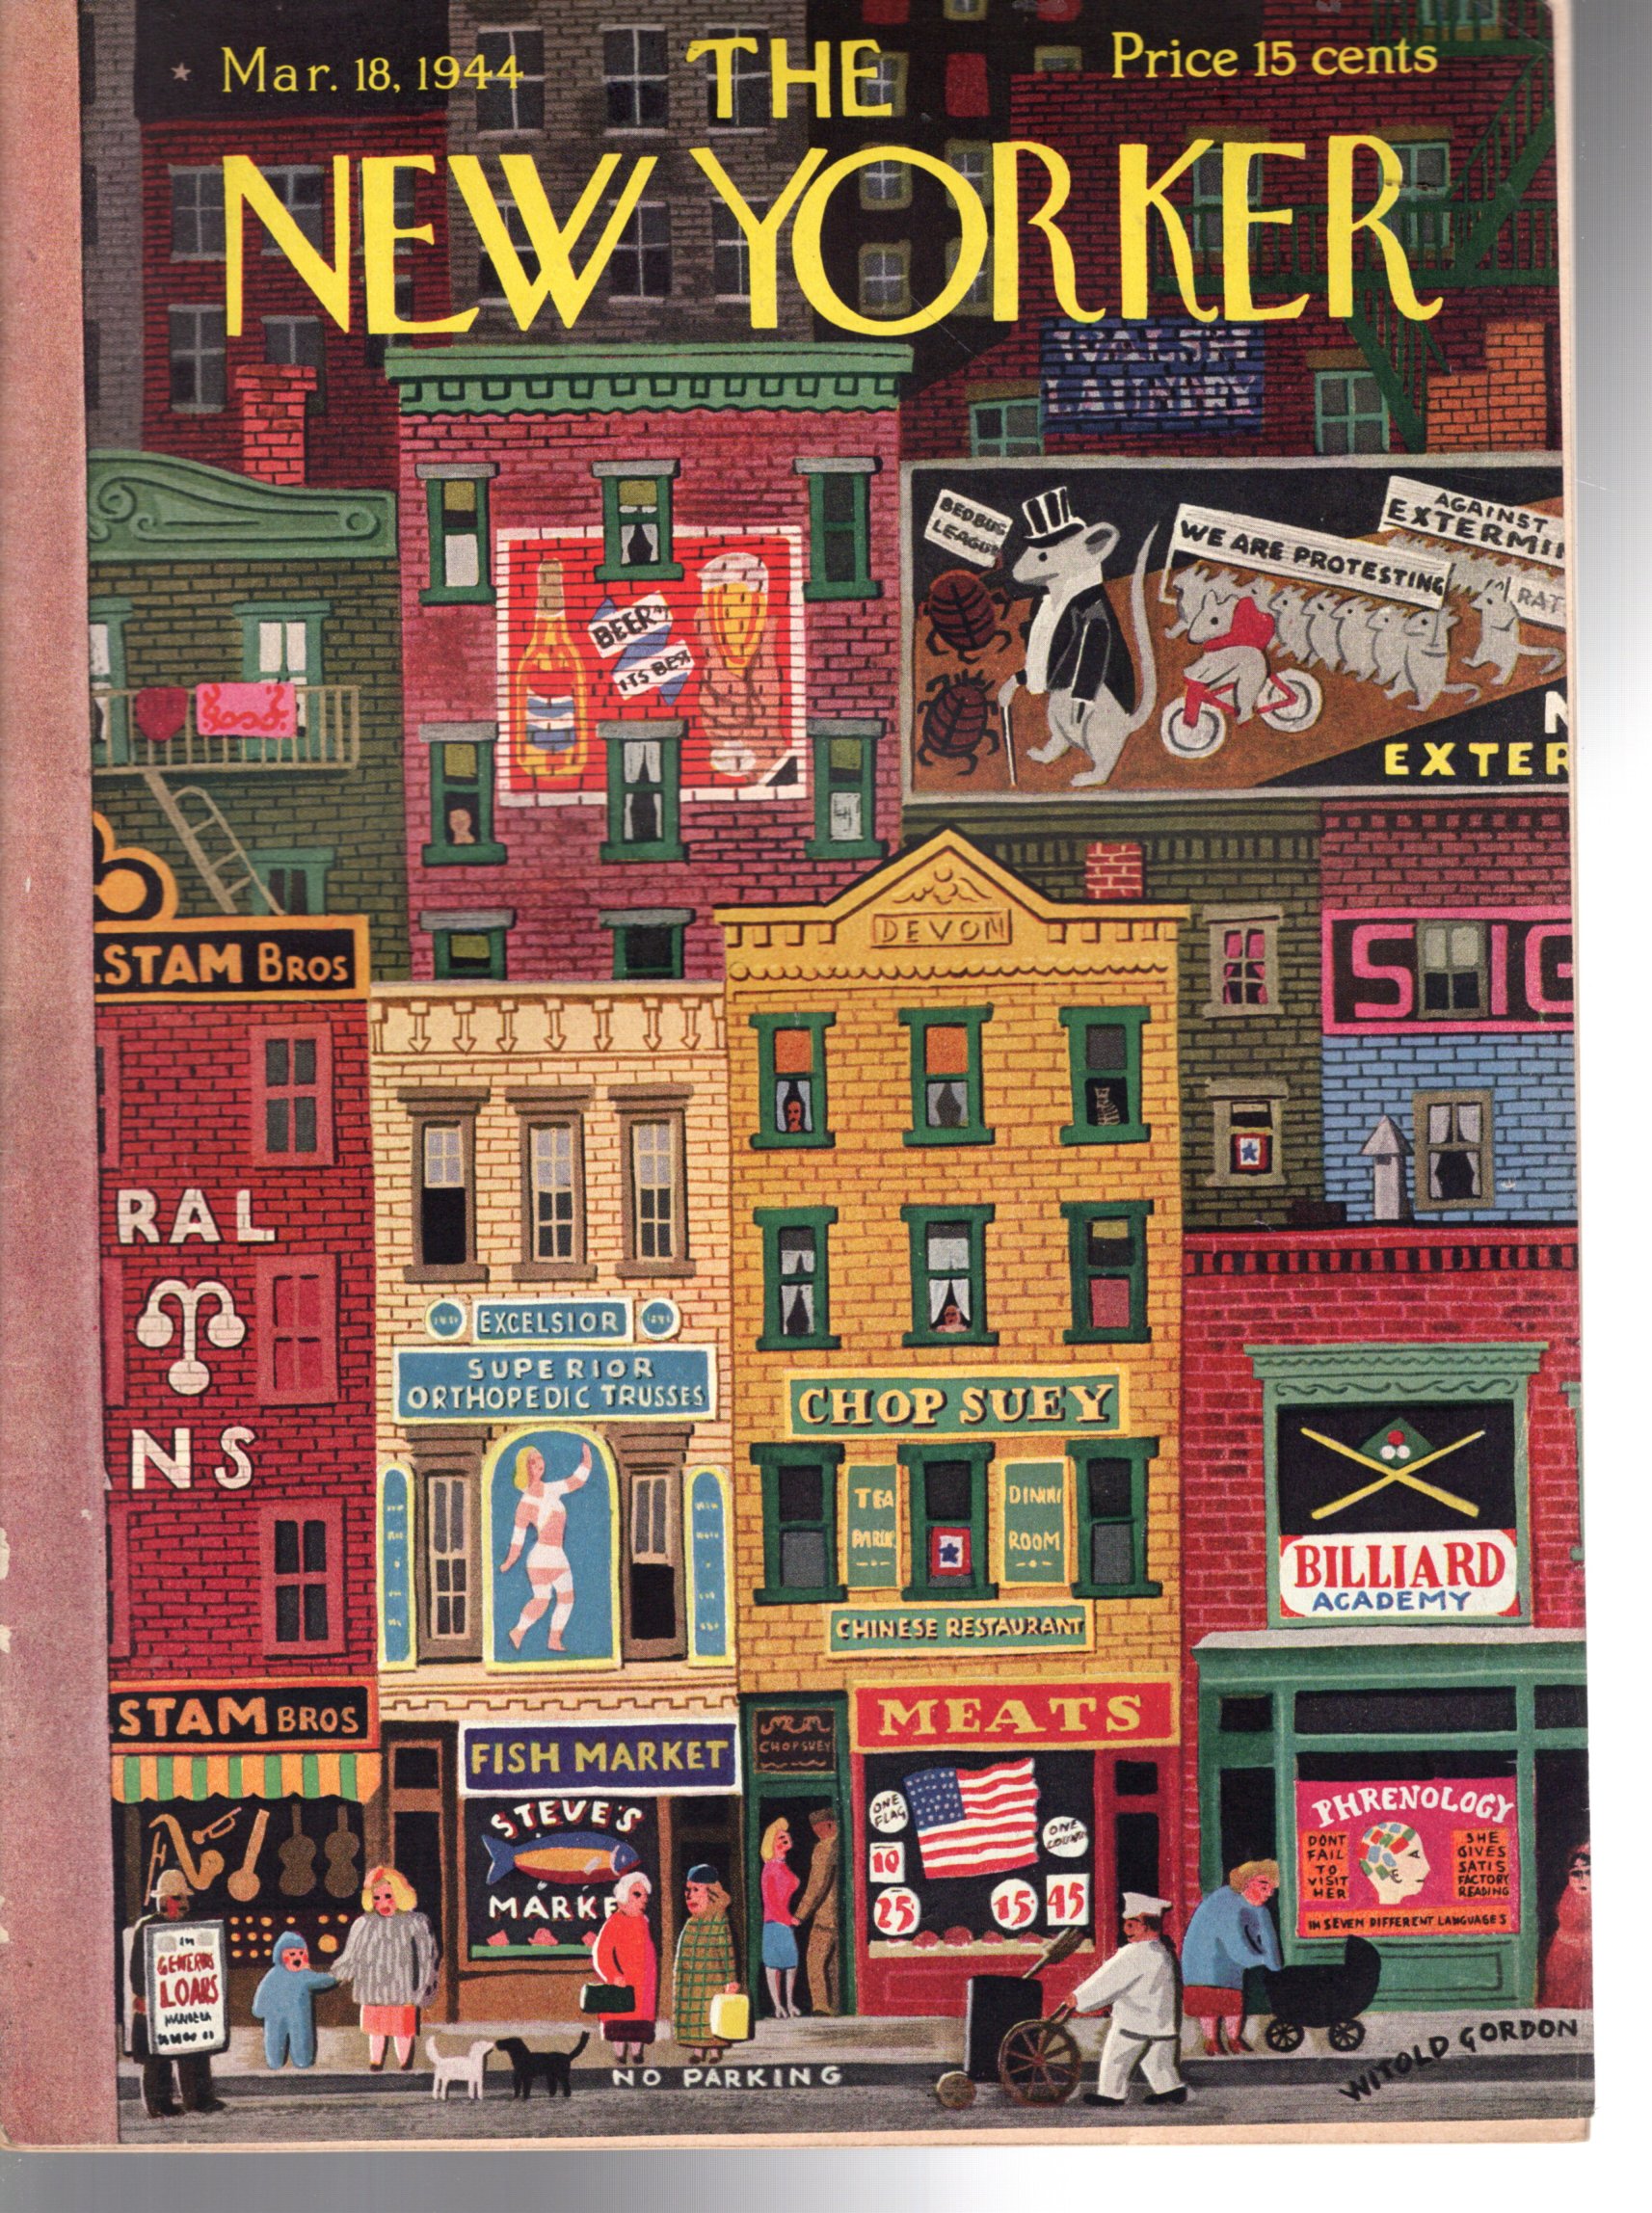 The New Yorker (Magazine) March 18, 1944